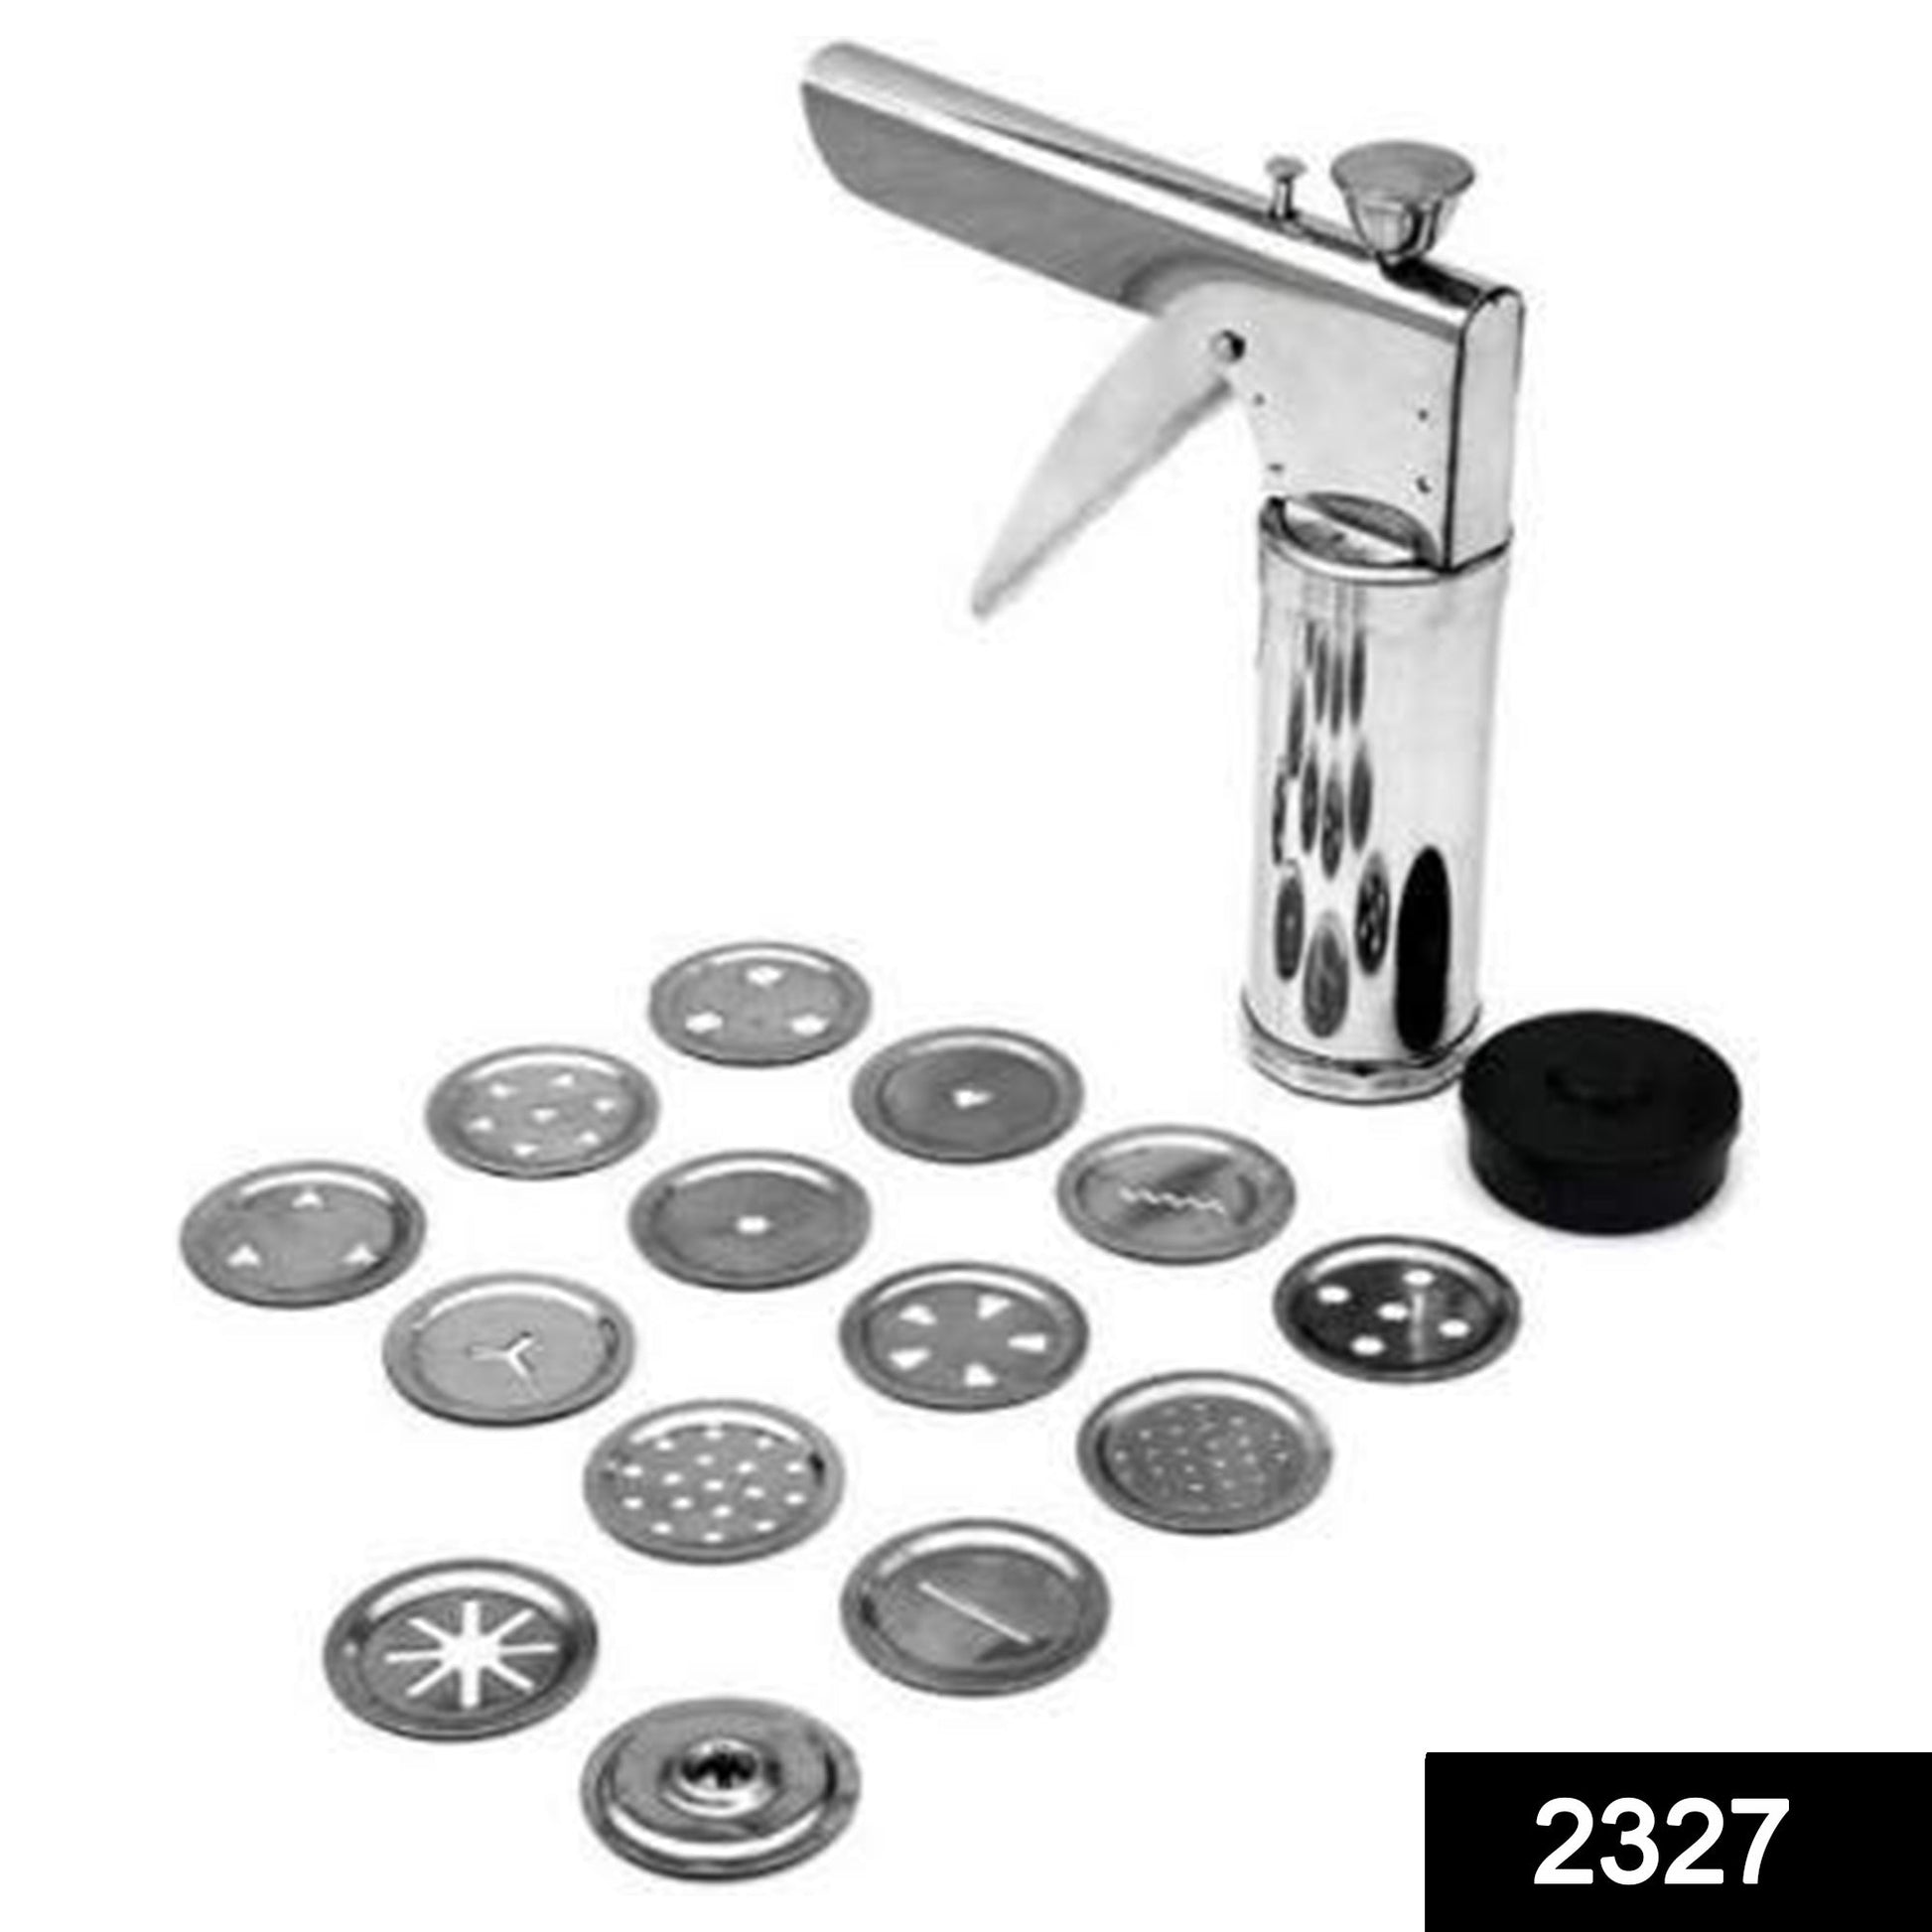 2327 15 in 1 Stainless Steel Kitchen Press with Different Parts DeoDap